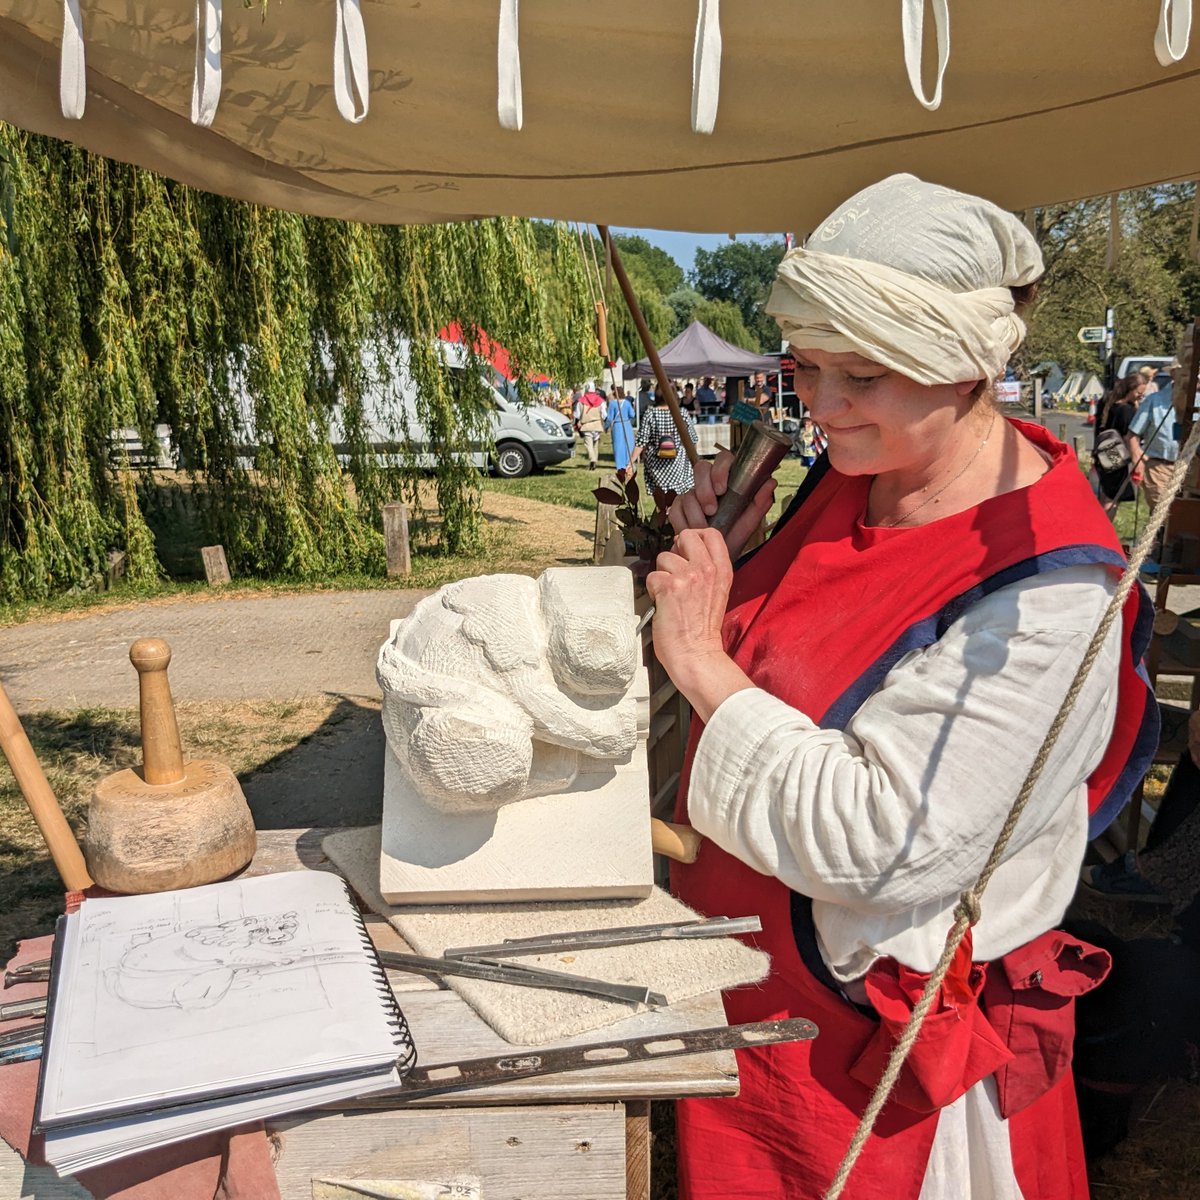 A new grotesque is coming to life in the skilled hands of our resident stonemason, Carrie Horwood! ⚒️ The new grotesque will form part of our handling collection, helping visitor's to understand the significance of stonemasonry in the medieval history of the #MaisonDieu #Dover